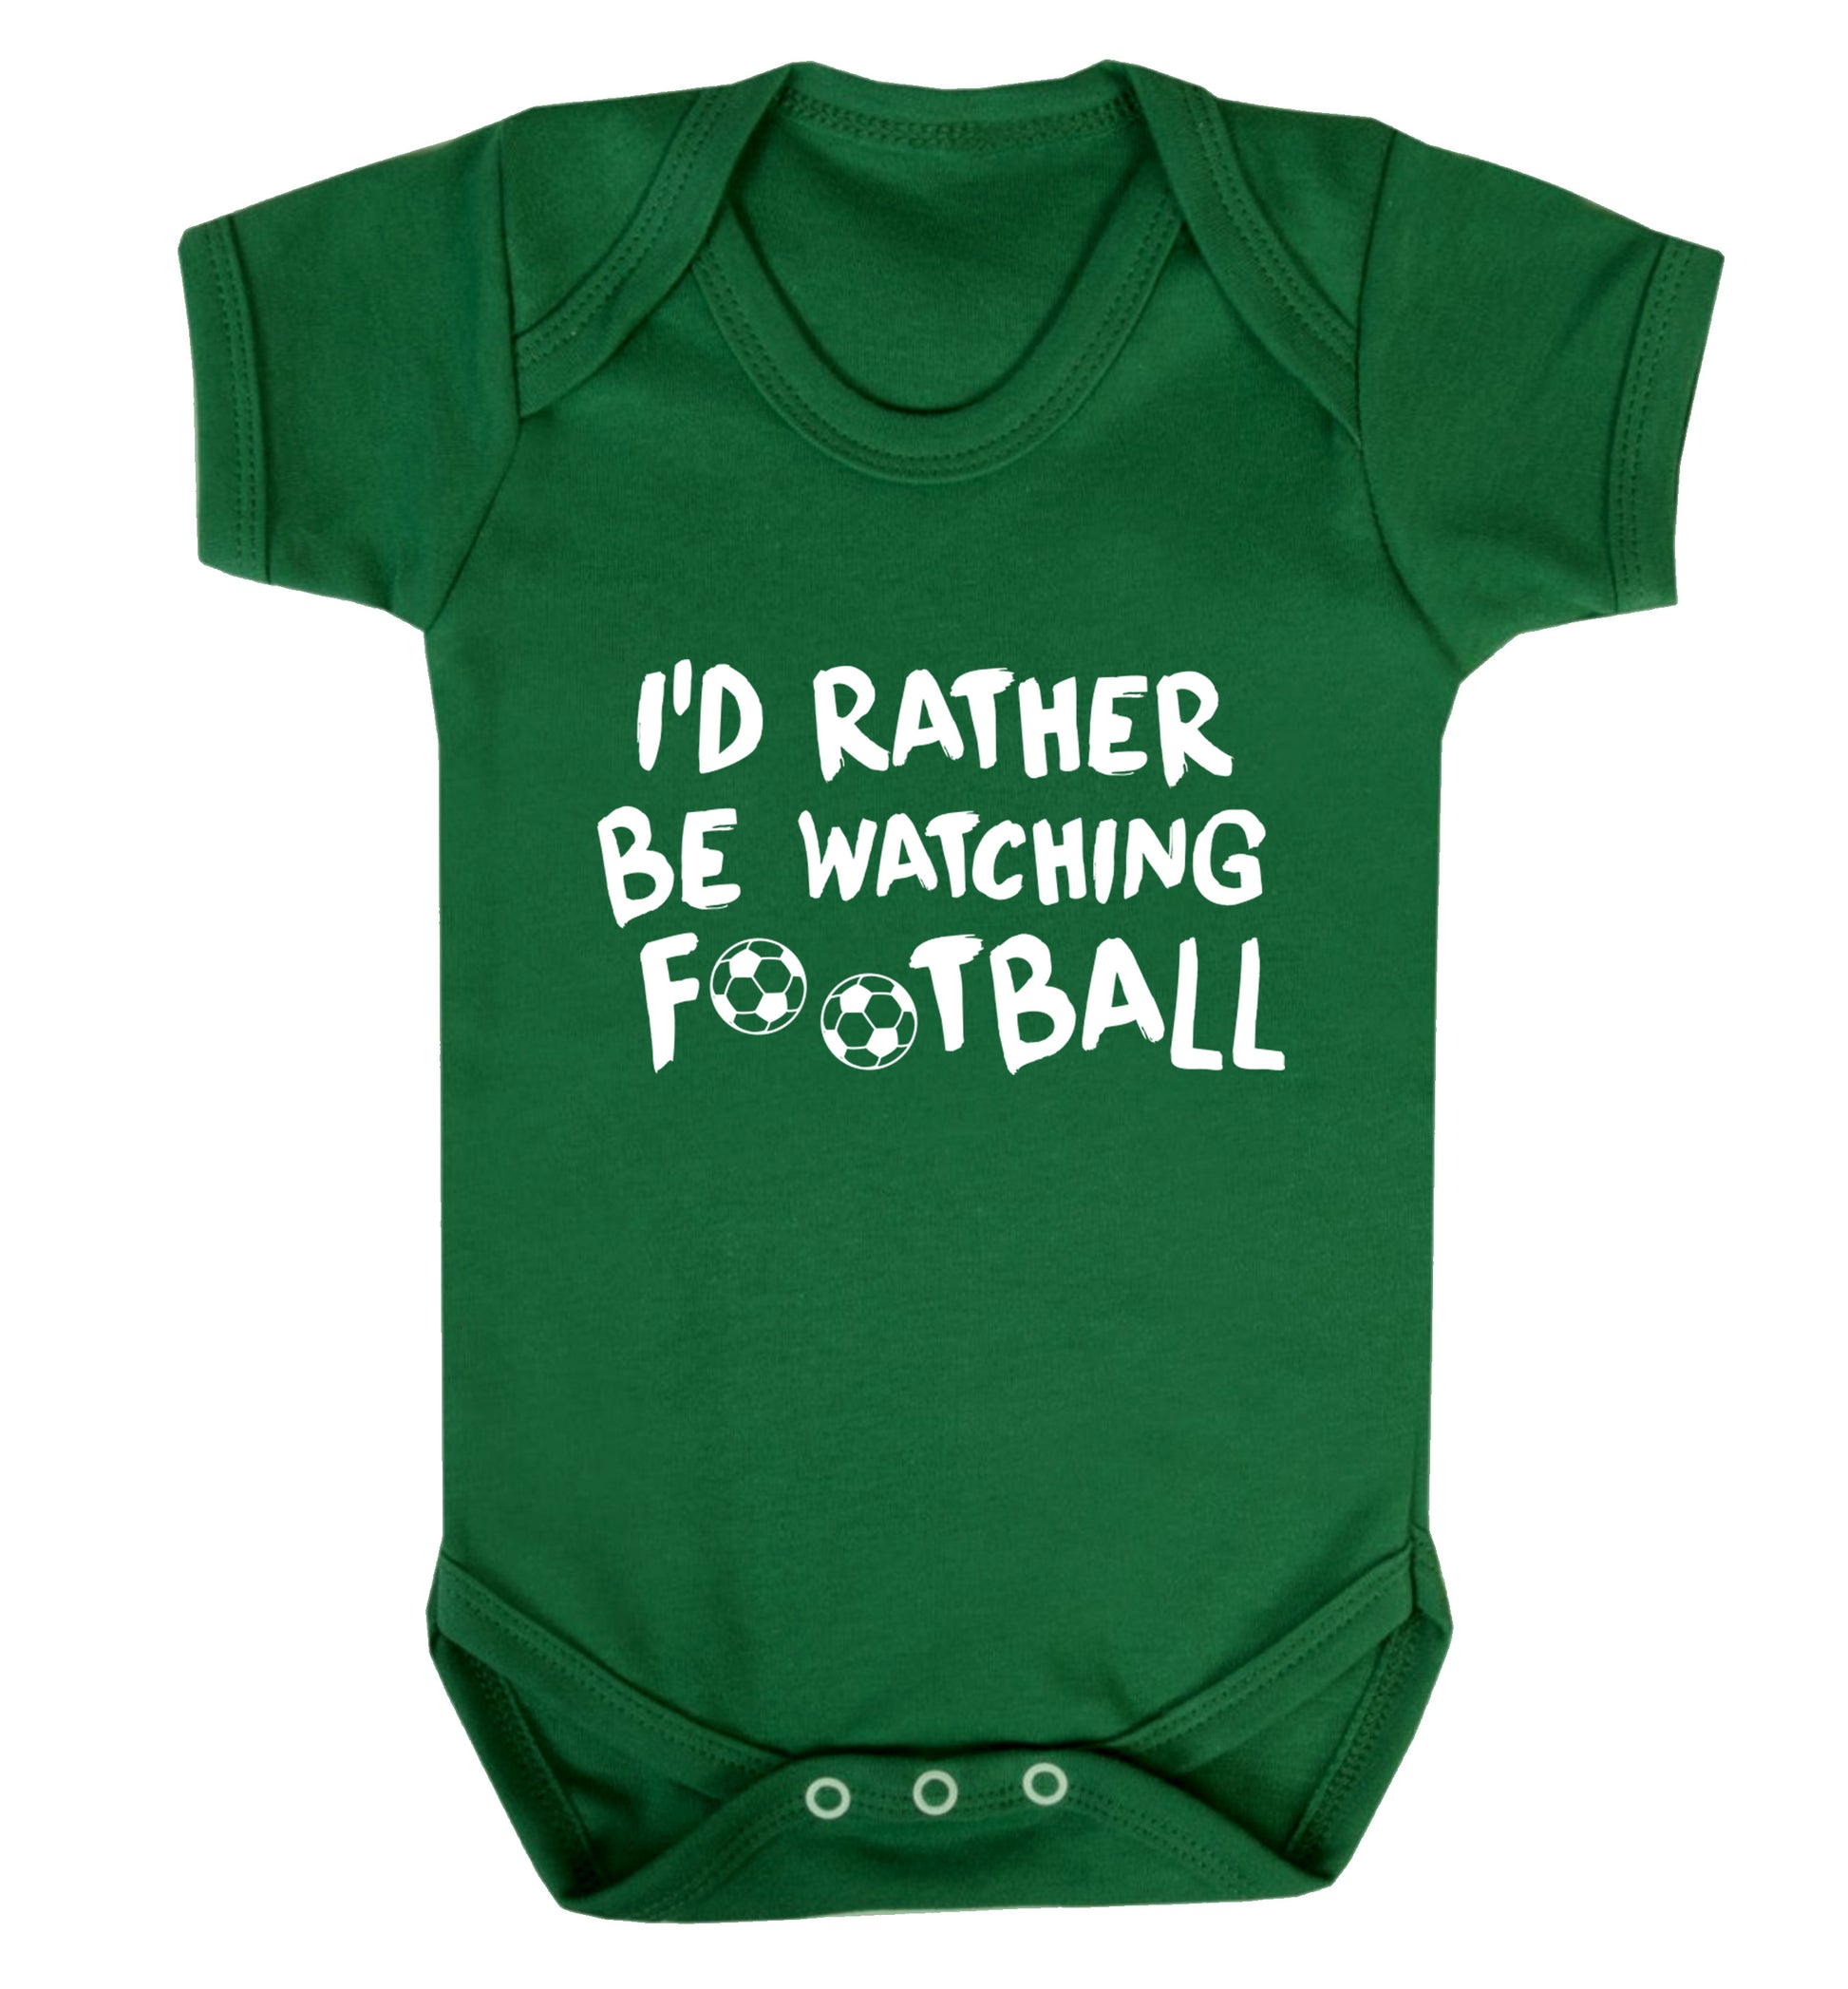 I'd rather be watching football Baby Vest green 18-24 months